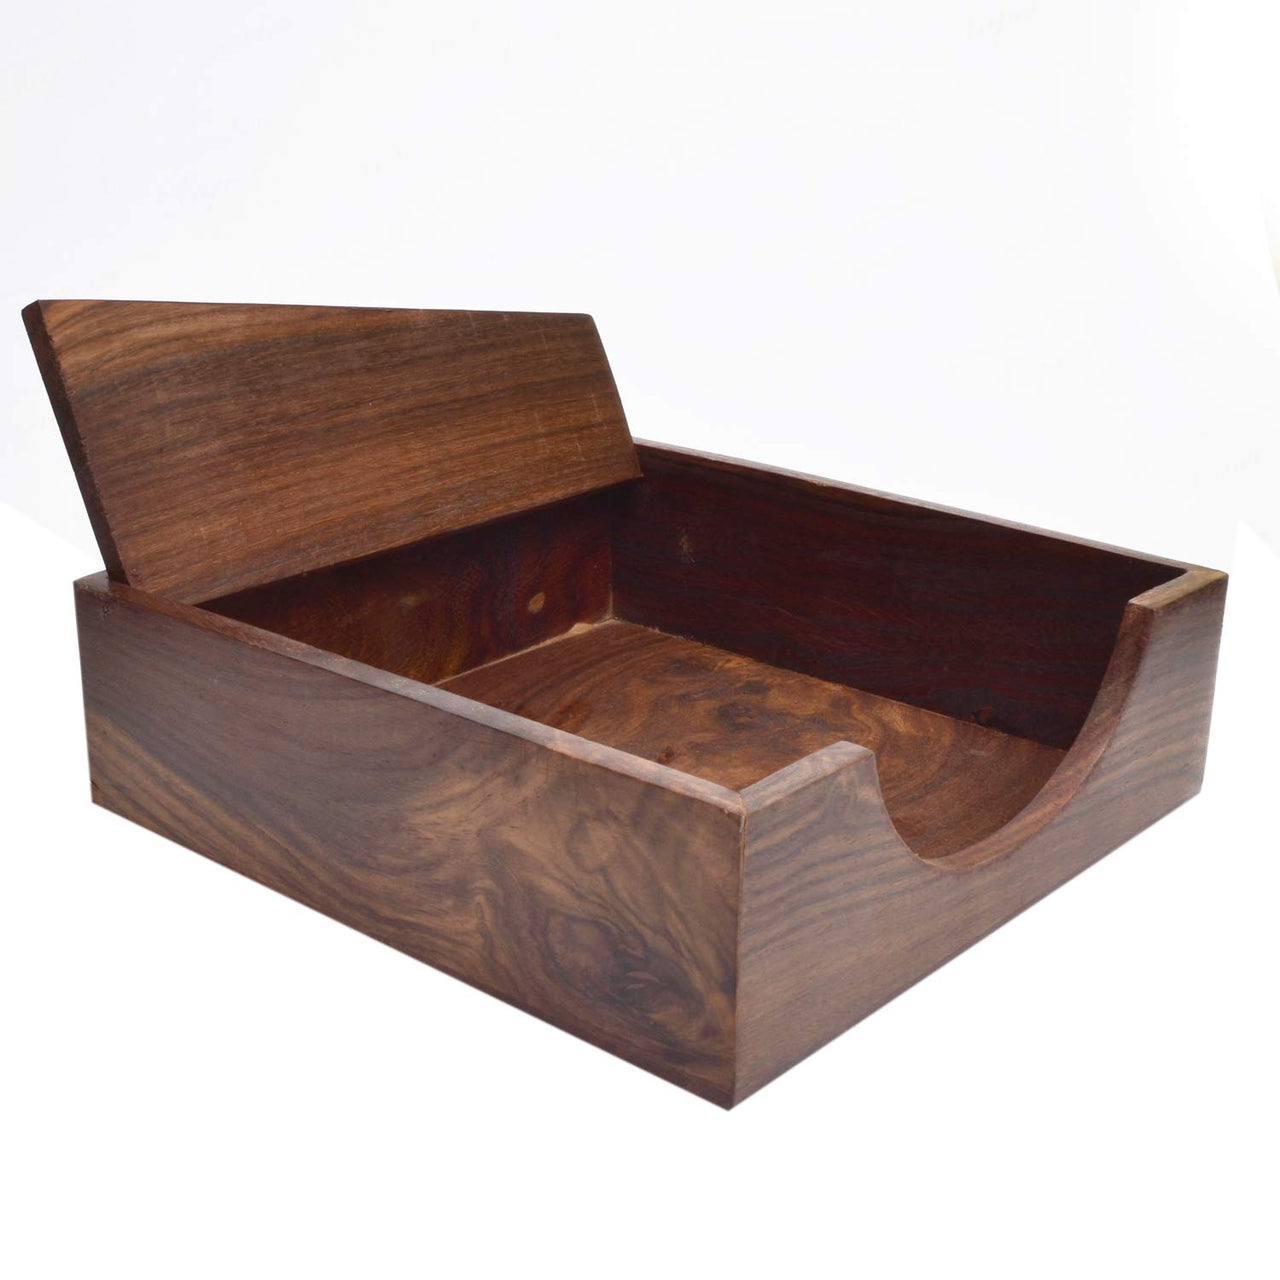 Wooden Rosewood Wooden Tissue Paper Rack , Napkin Holder for Restaurant, Office, Hotel & Table Decoration Dime Store